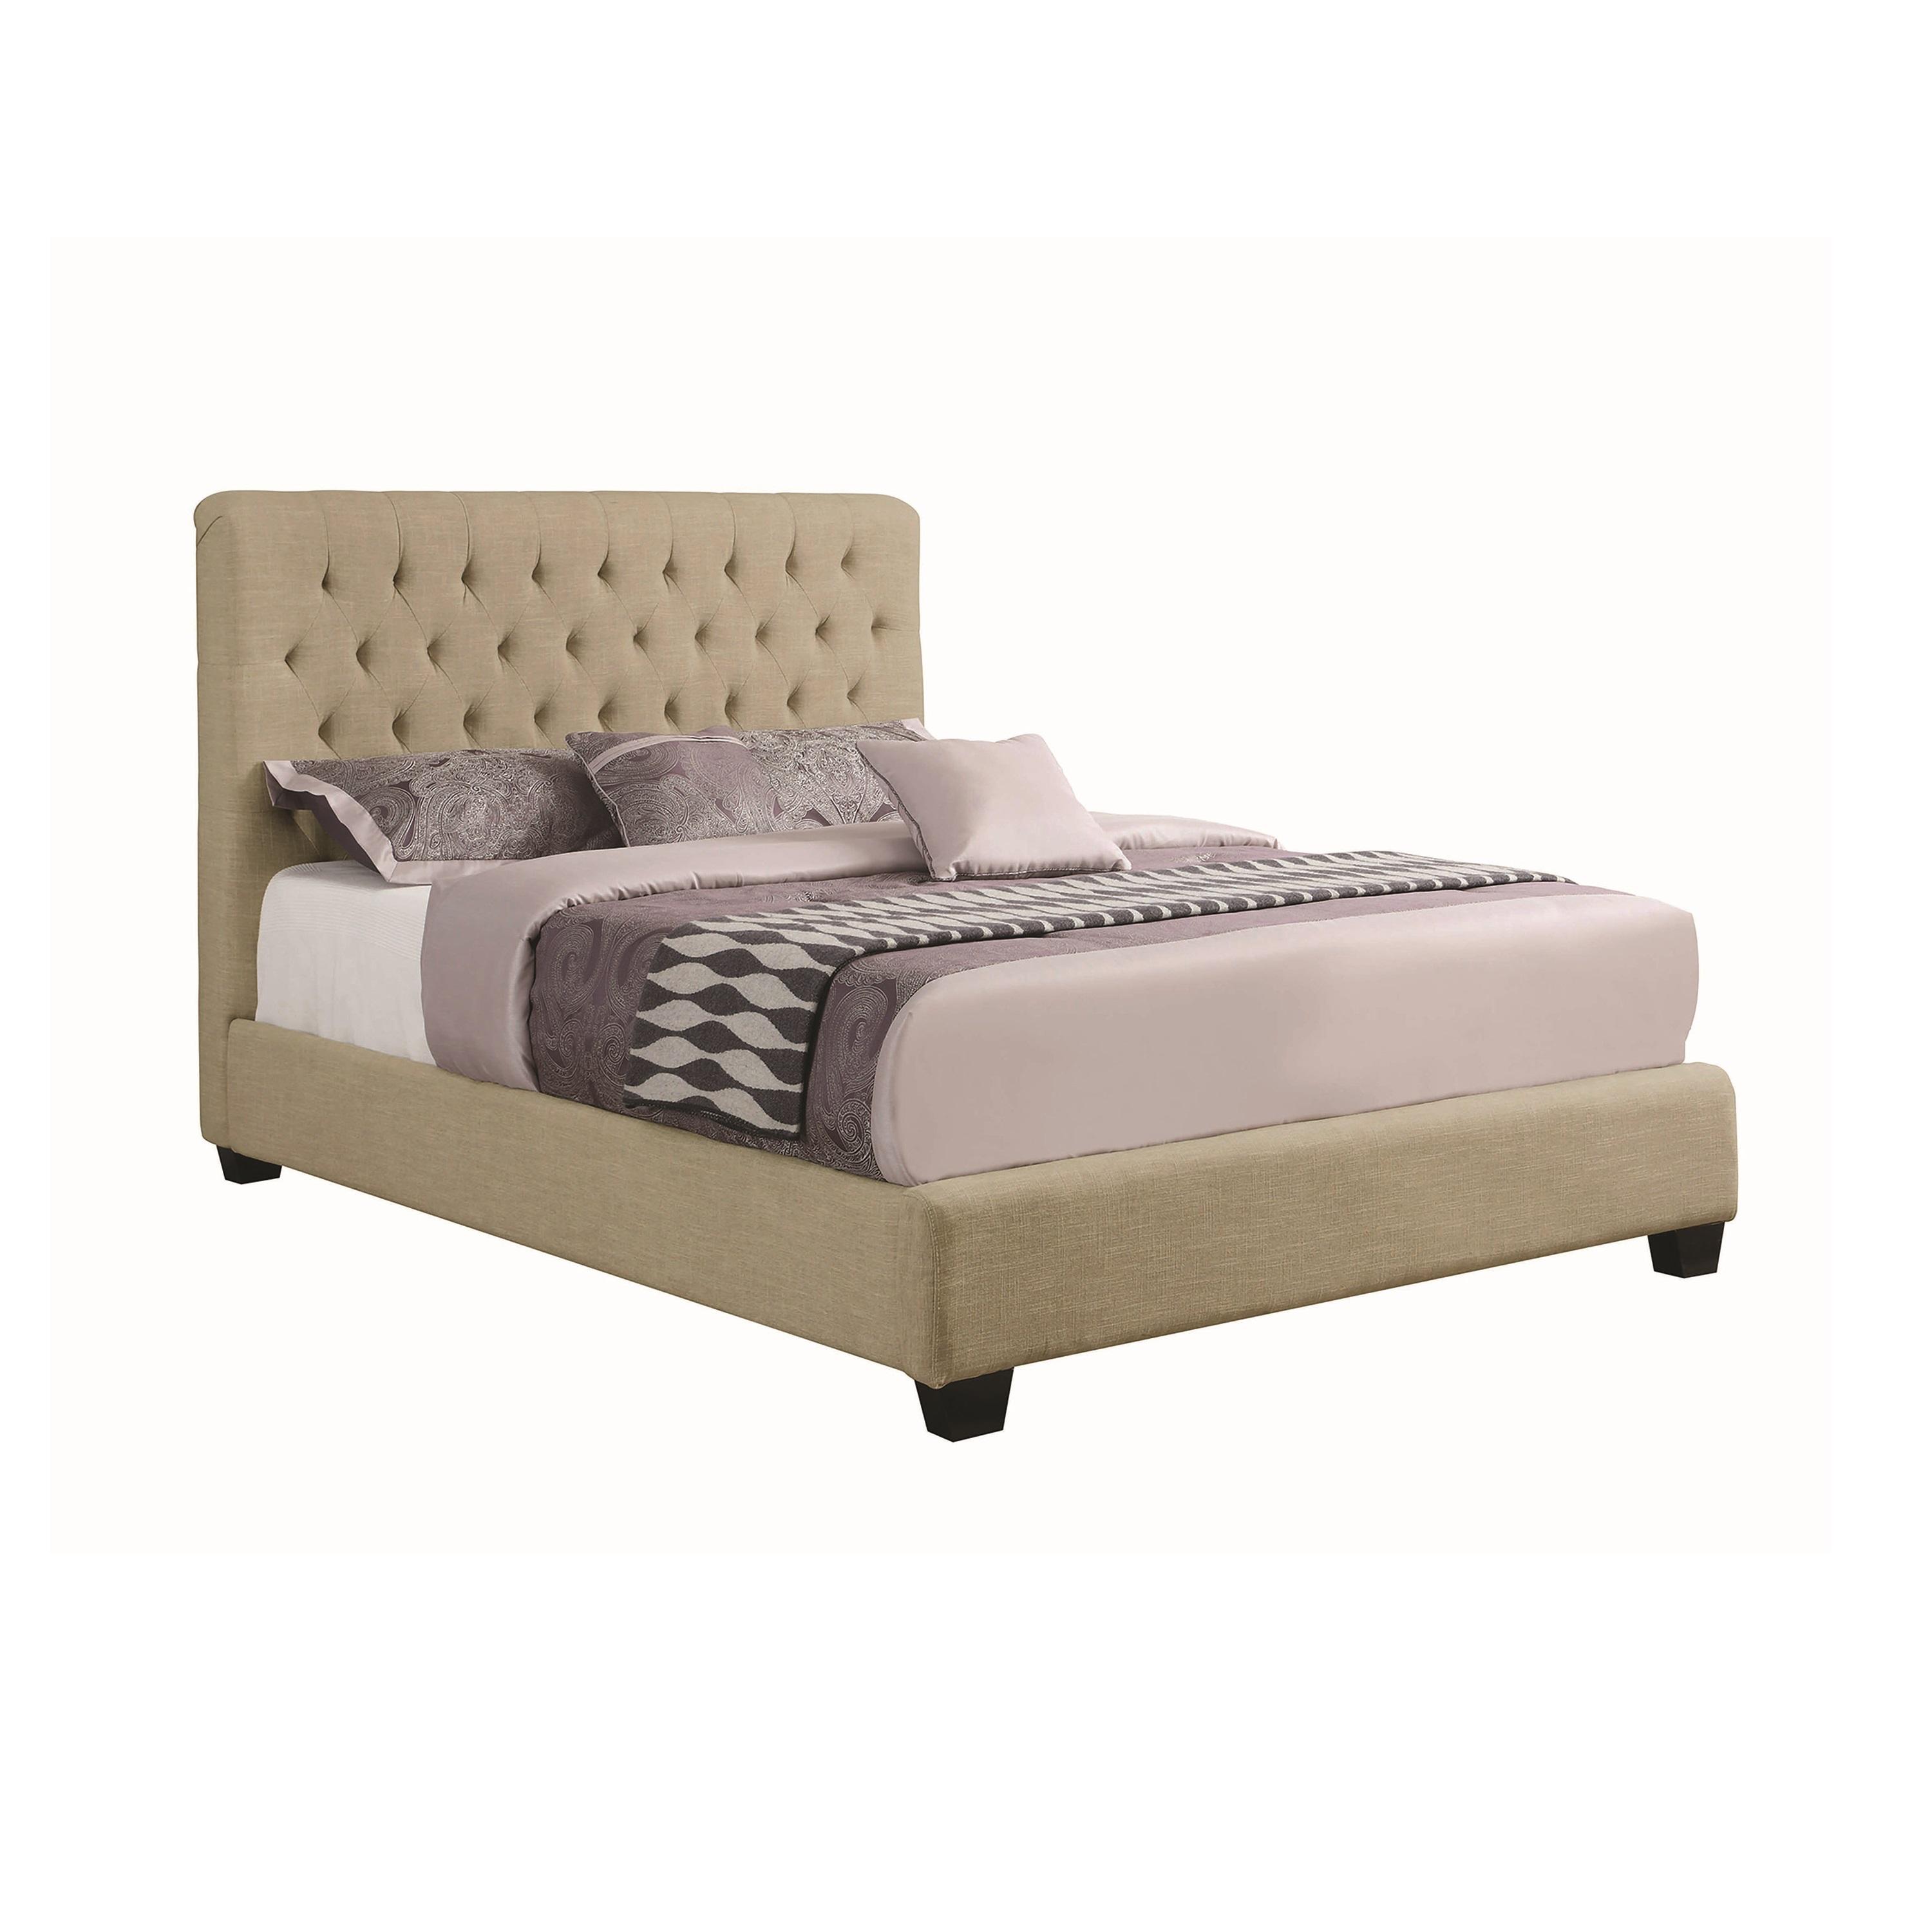 Contemporary Bed 300007F Chloe 300007F in Oatmeal Fabric